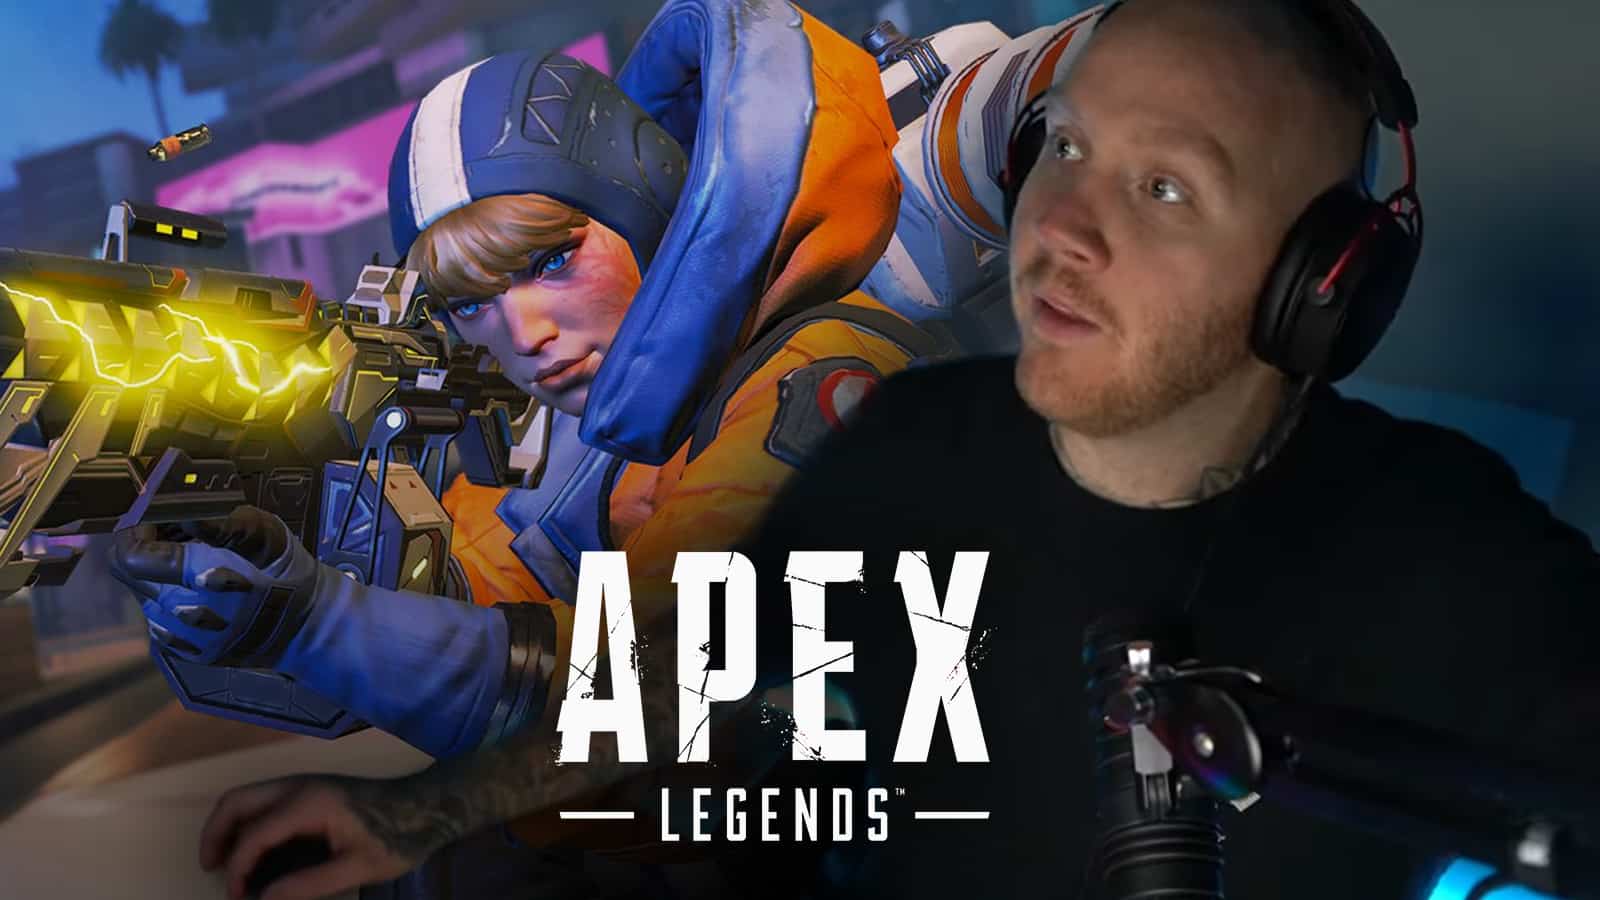 TimTheTatman stares at Apex Legends after saying he doesn't want to play it anymore.